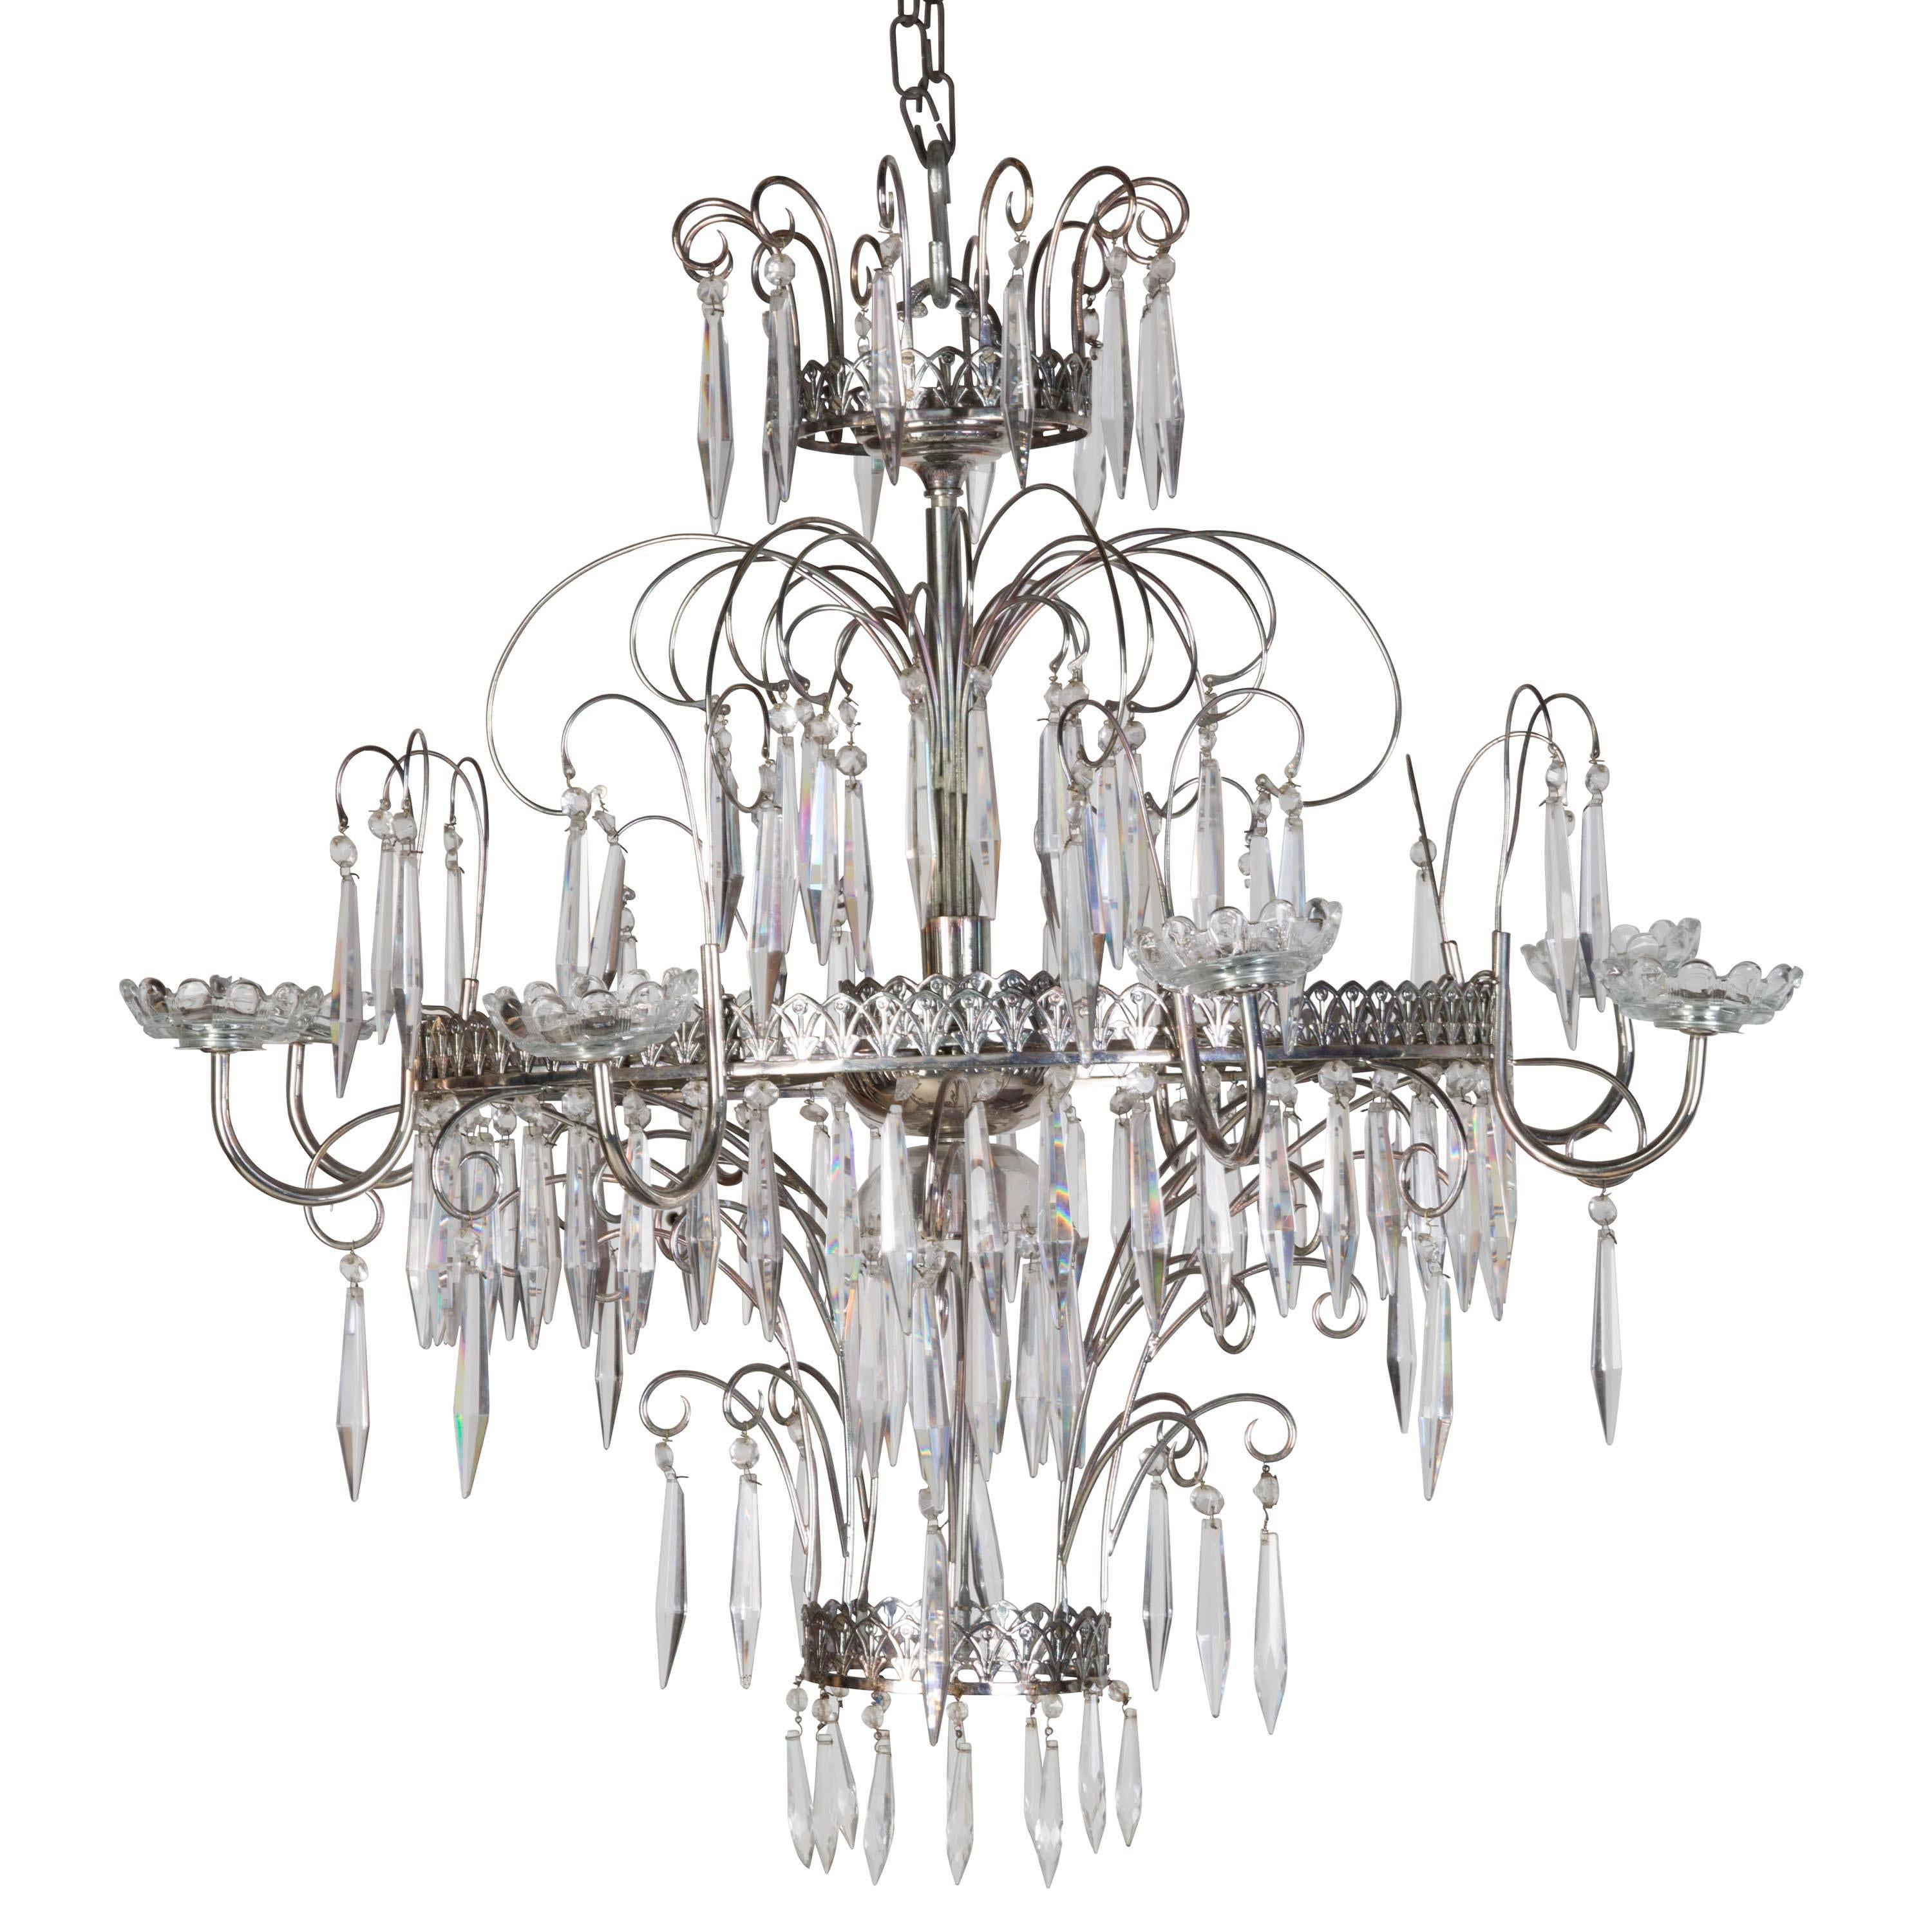 1960s chrome metal French chandelier.